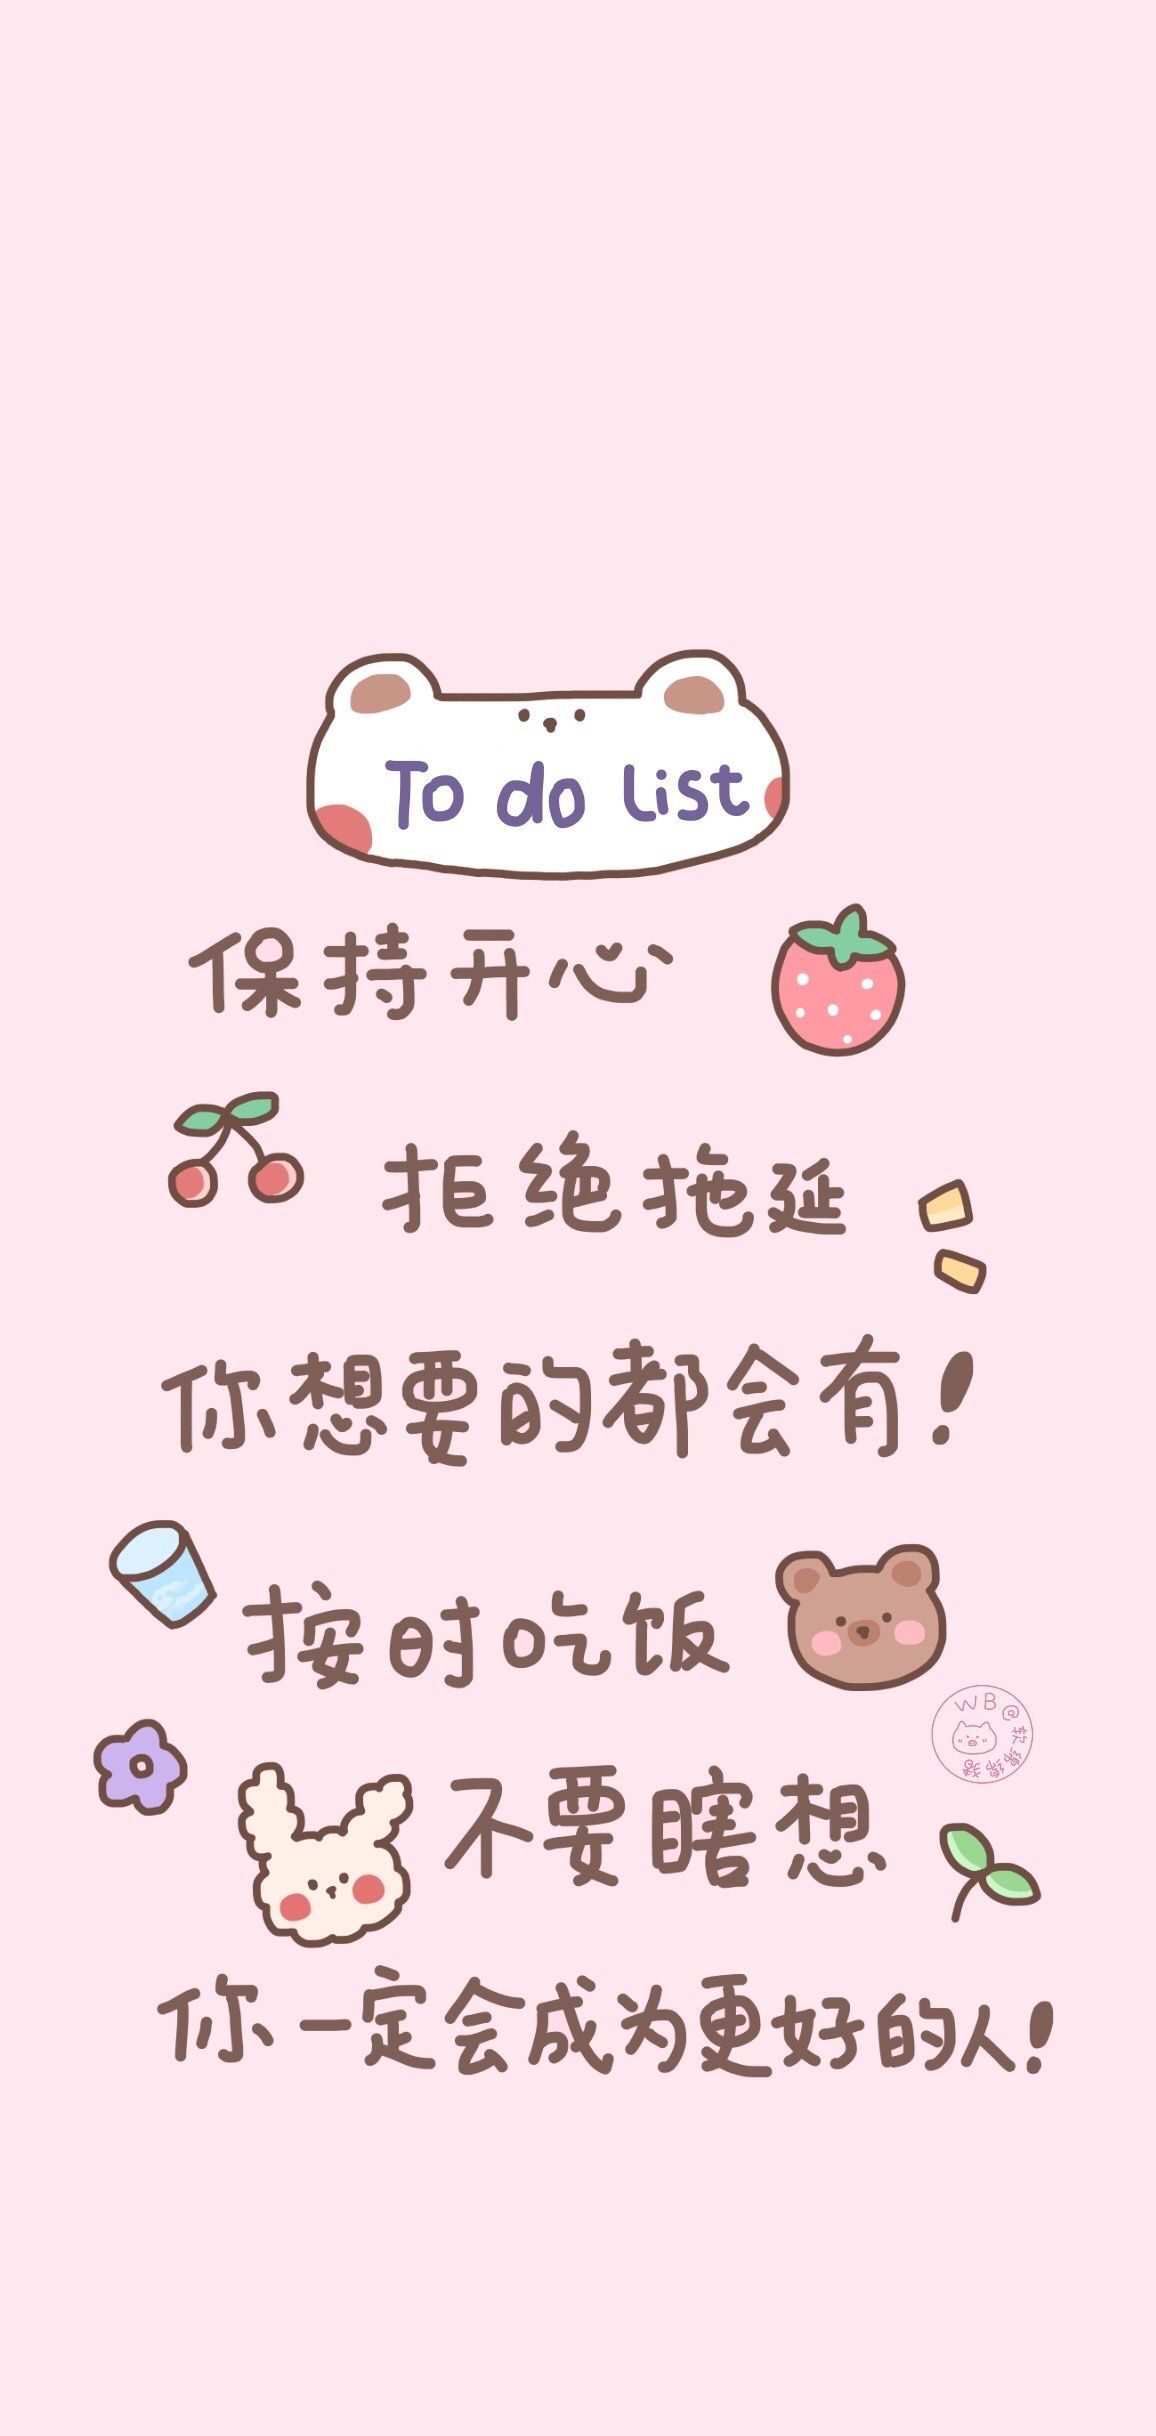 A cute wallpaper with a message about to do lists - Chinese